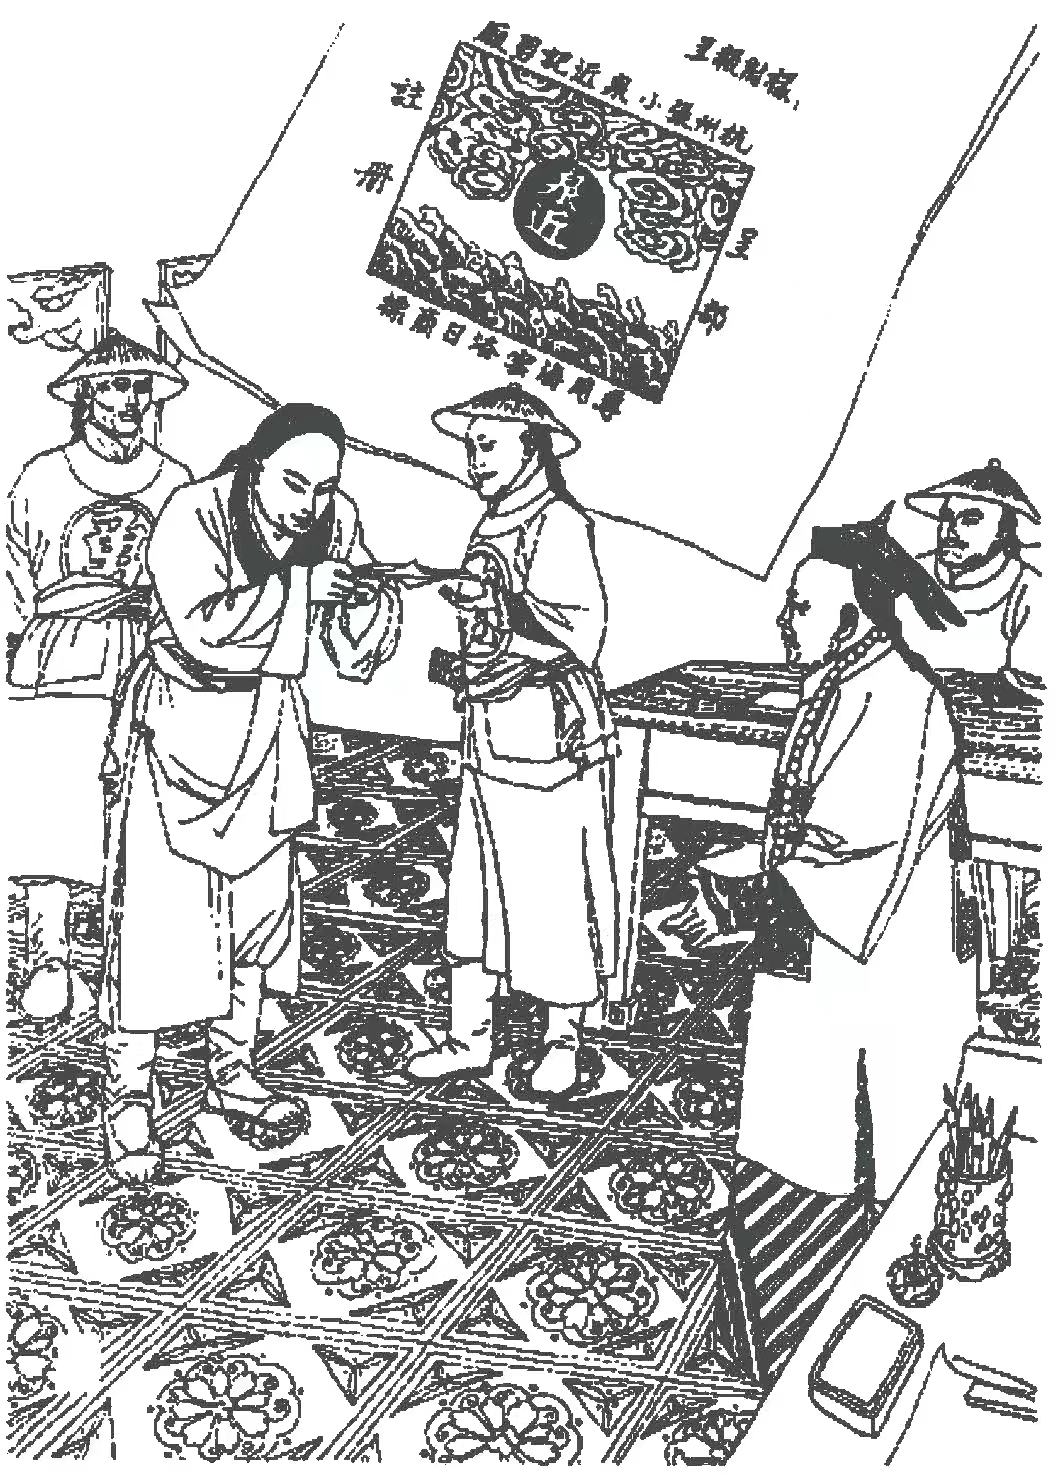 In 1904,The earliest trademark in China.